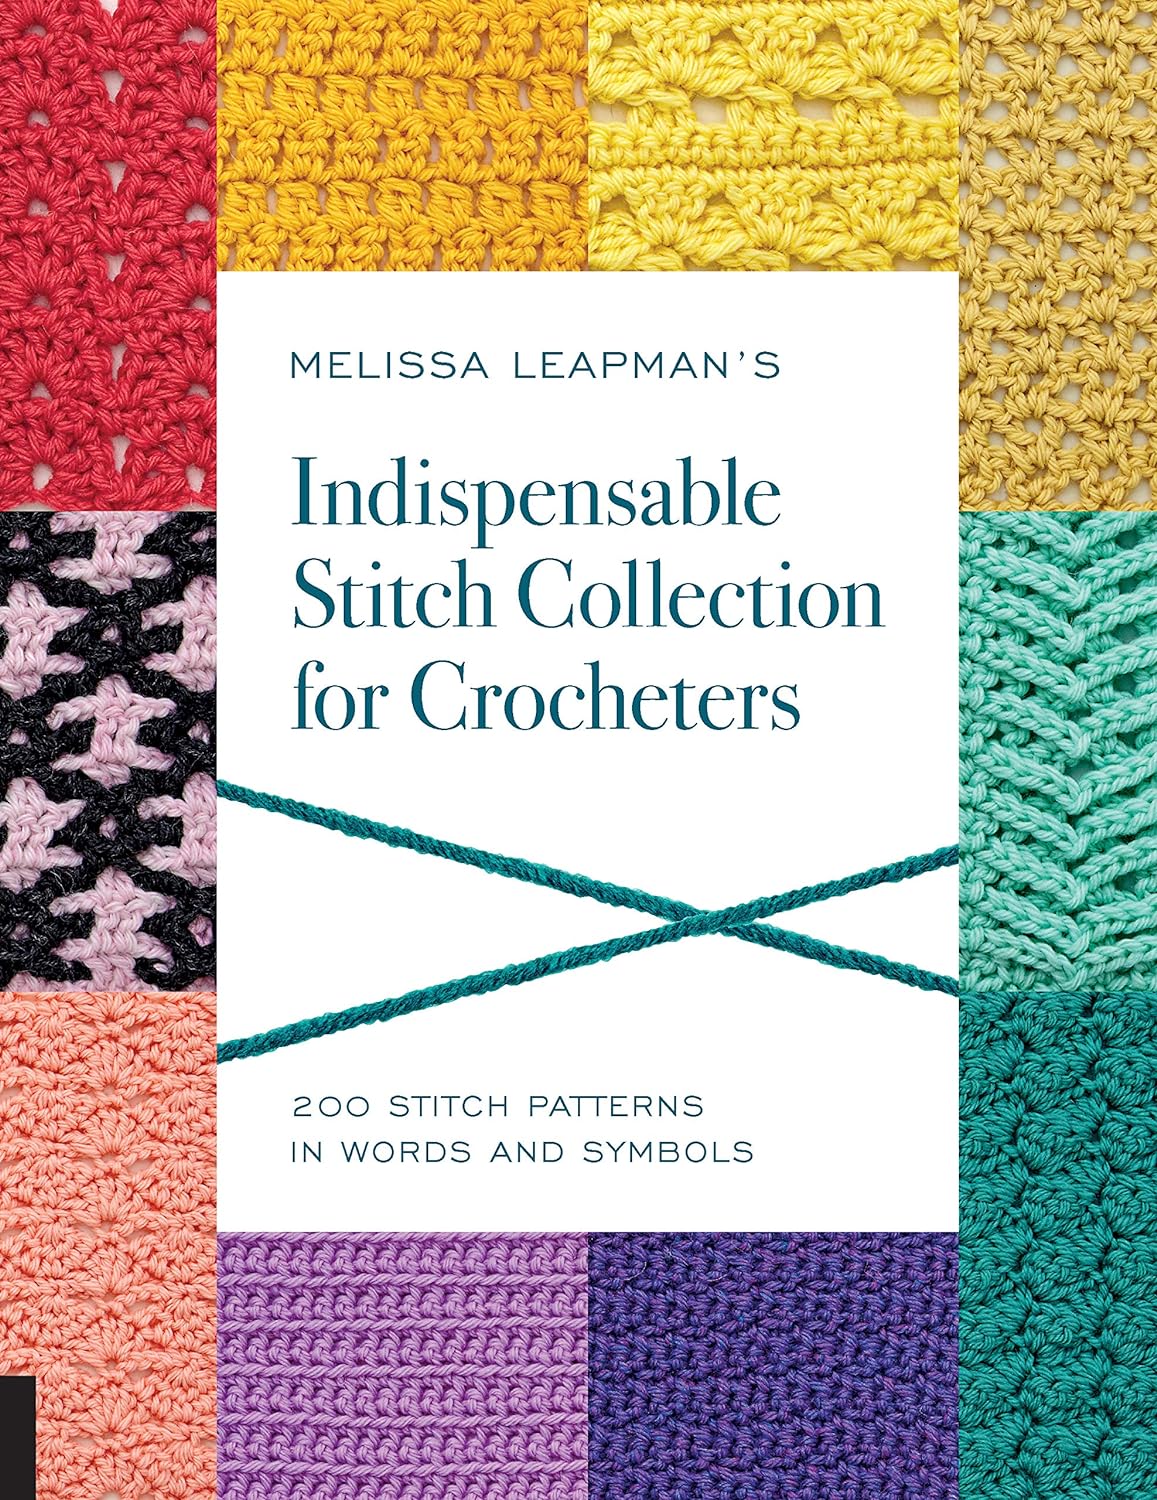 Indespensable Stitch Collection for Crocheters